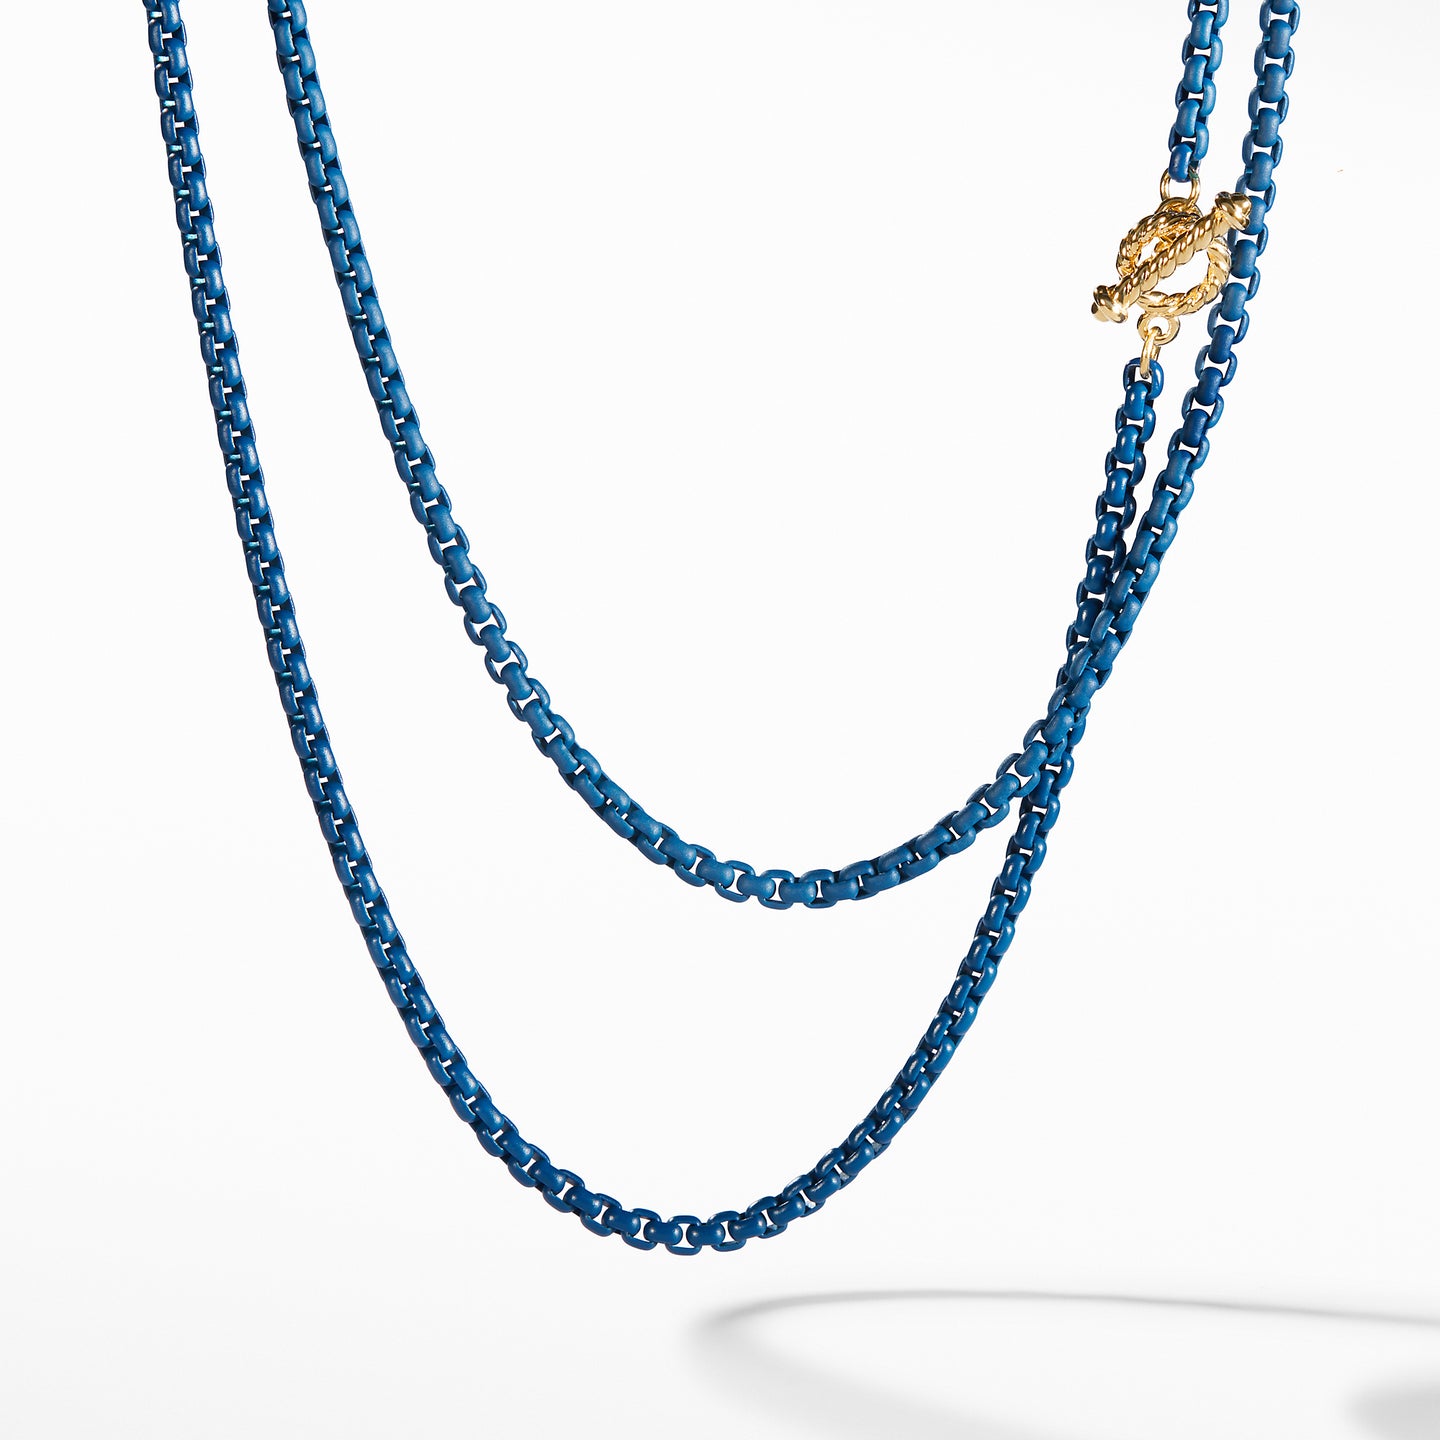 DY Bel Aire Chain Necklace in Navy with 14K Gold Accents, 41